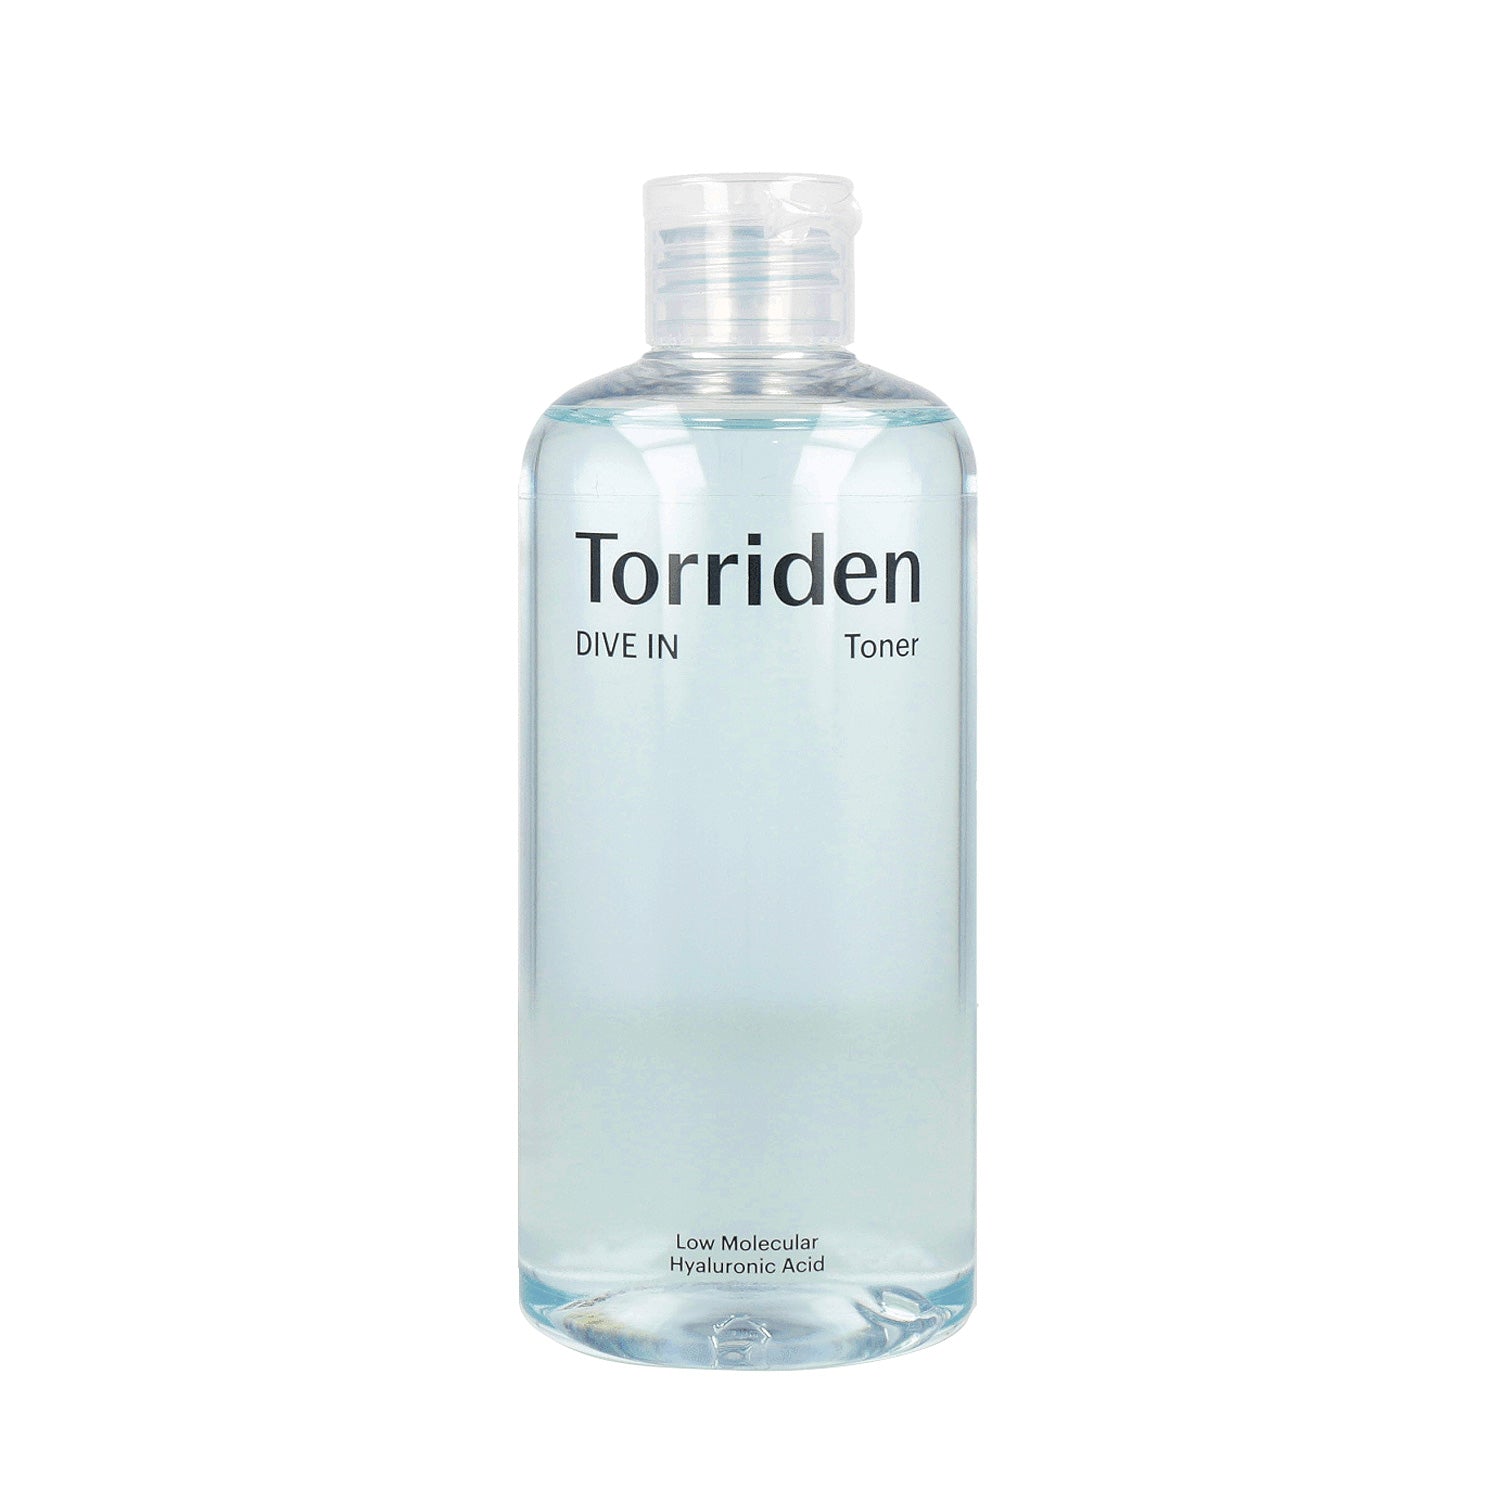 Contains low molecular weight hyaluronic acid that penetrates deeply into the skin to provide intense hydration.